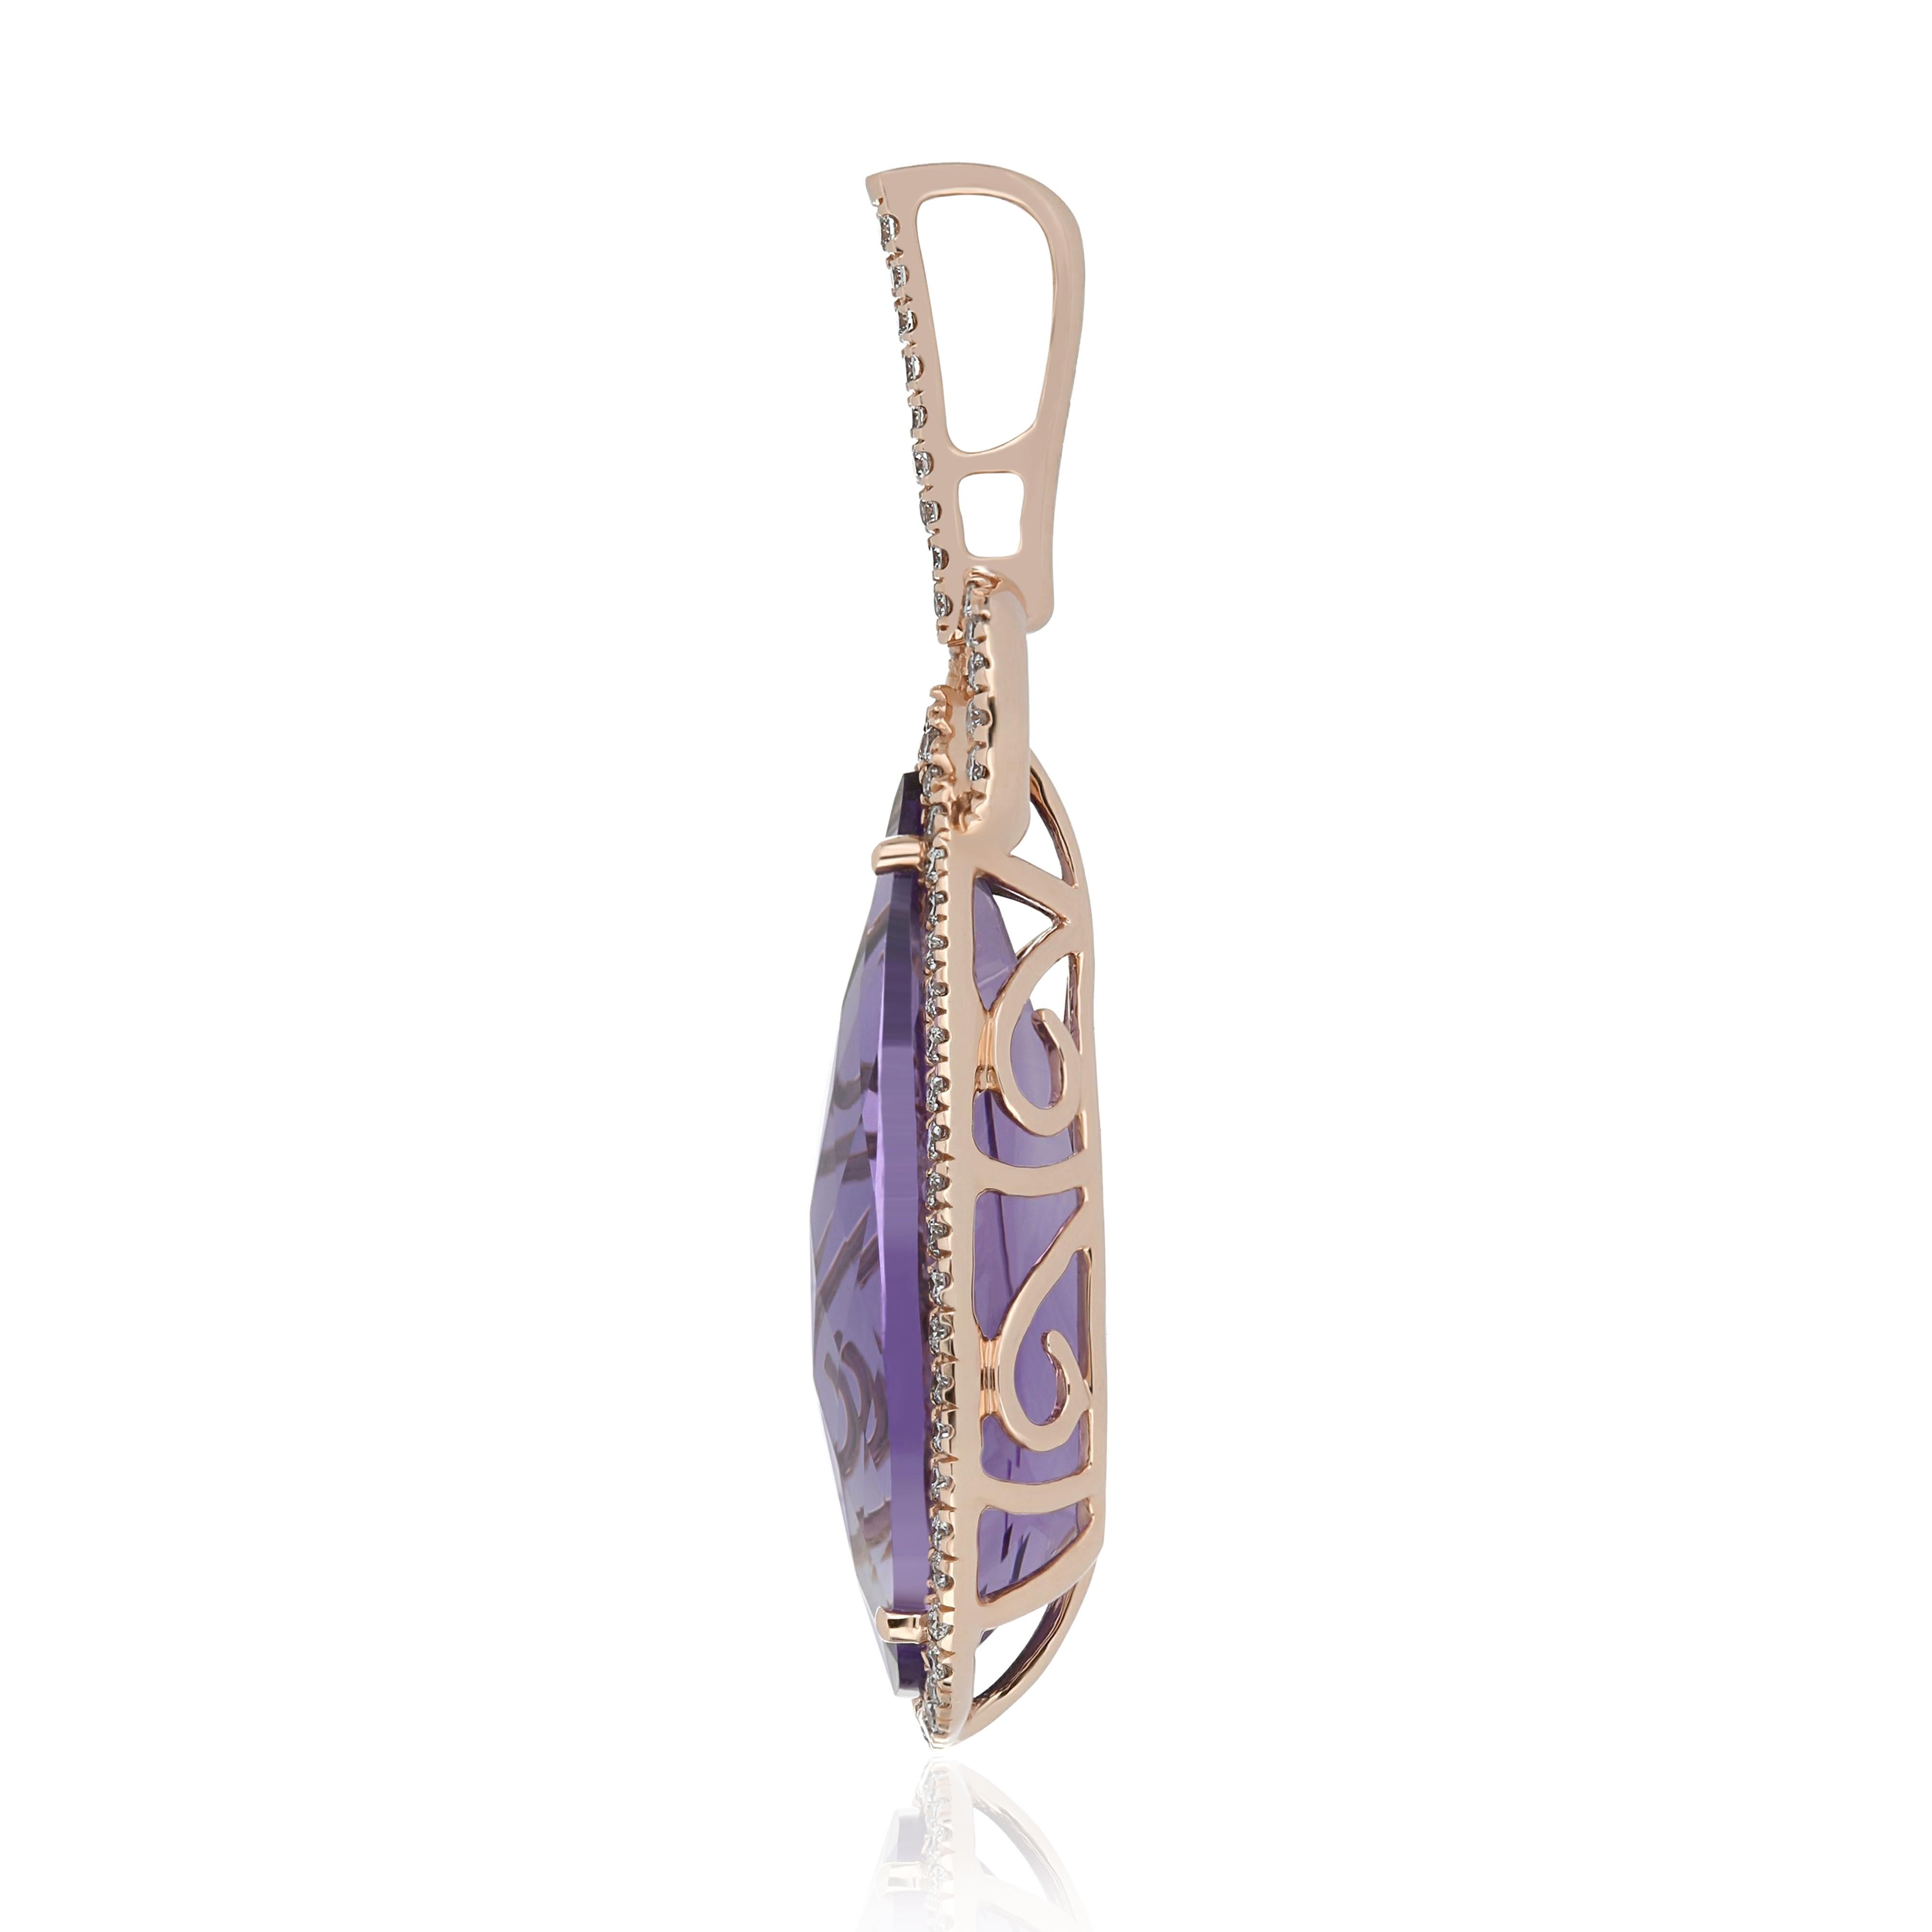 Elegant and exquisitely detailed 14 Karat Rose Gold Pendant, center set with 7.55Cts .Pear Shape Amethyst, and micro pave set Diamonds, weighing approx. 0.3Cts Beautifully Hand crafted in 14 Karat Rose Gold.

Stone Detail:
Amethyst: 22x10MM

Stone